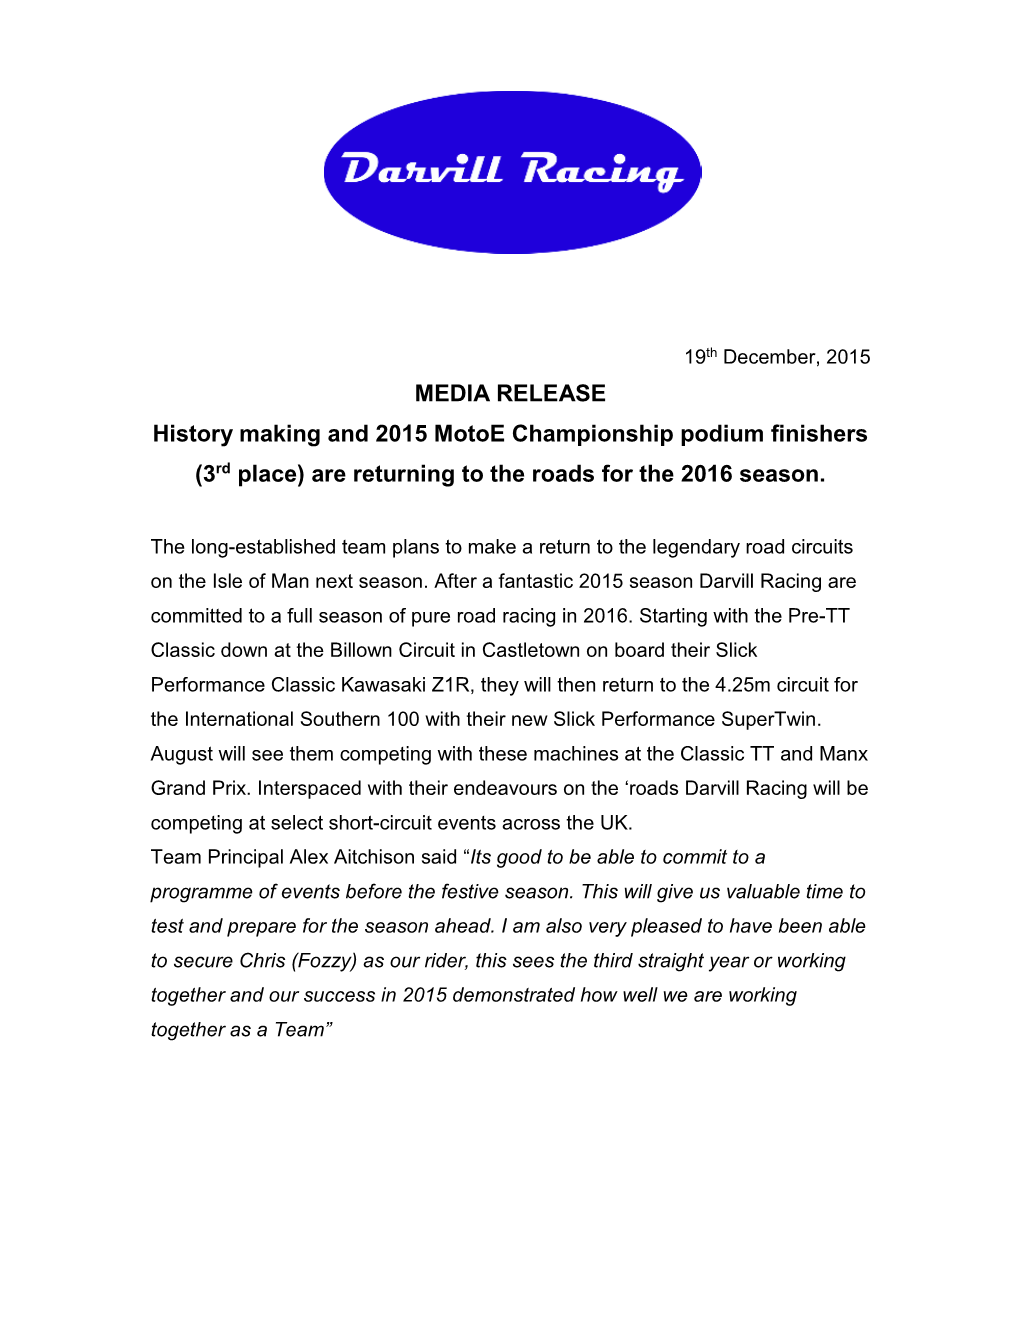 MEDIA RELEASE History Making and 2015 Motoe Championship Podium Finishers (3Rd Place) Are Returning to the Roads for the 2016 Season